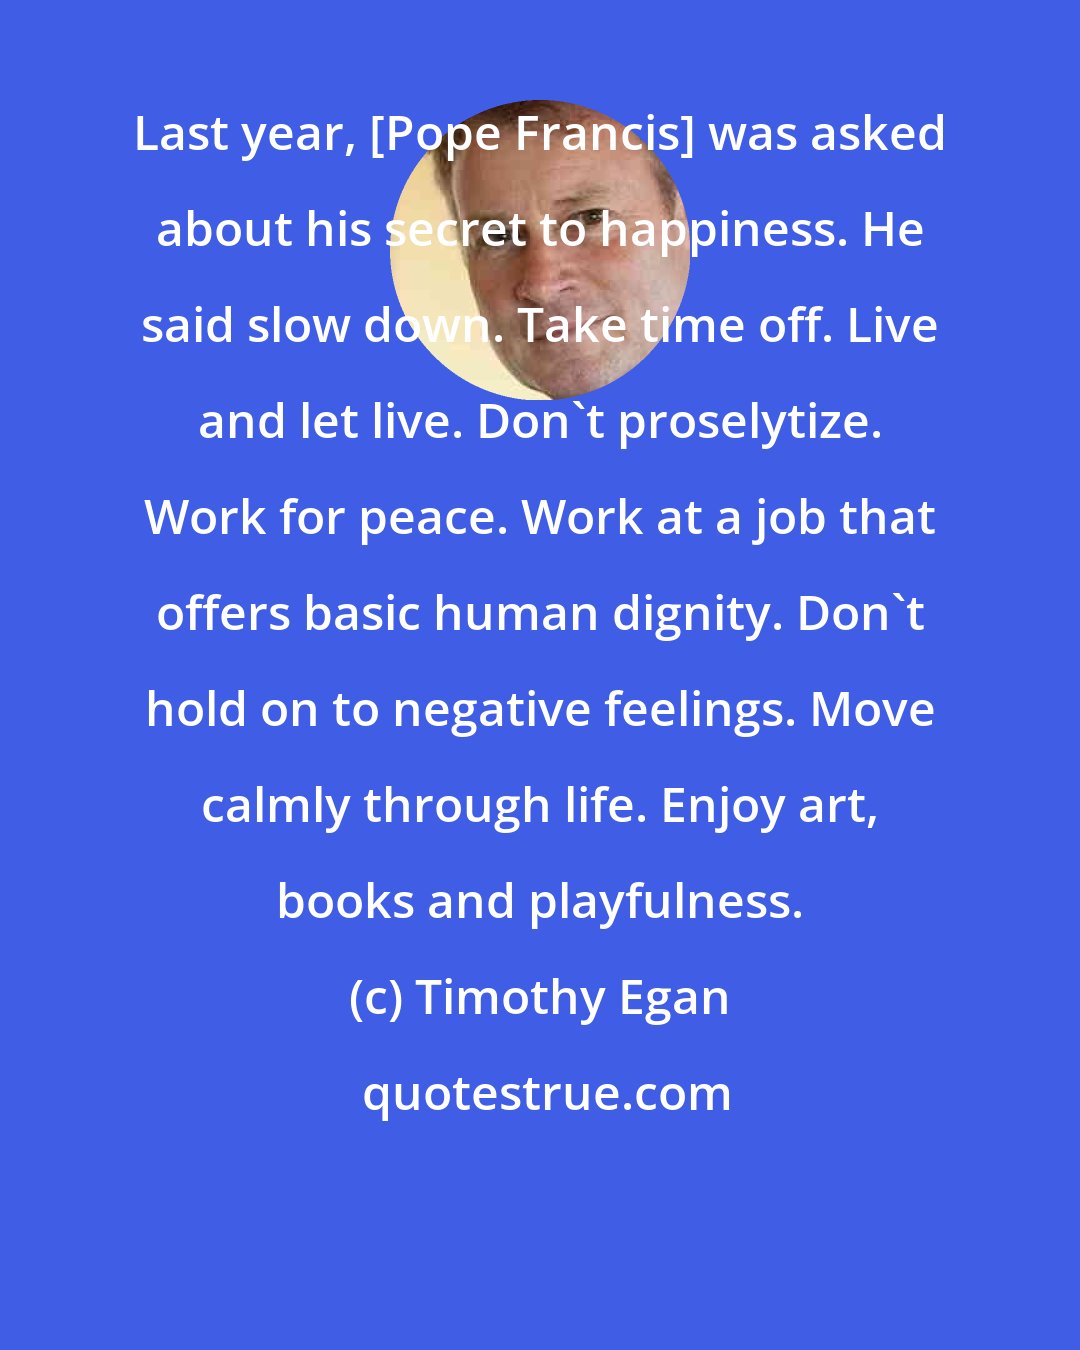 Timothy Egan: Last year, [Pope Francis] was asked about his secret to happiness. He said slow down. Take time off. Live and let live. Don't proselytize. Work for peace. Work at a job that offers basic human dignity. Don't hold on to negative feelings. Move calmly through life. Enjoy art, books and playfulness.